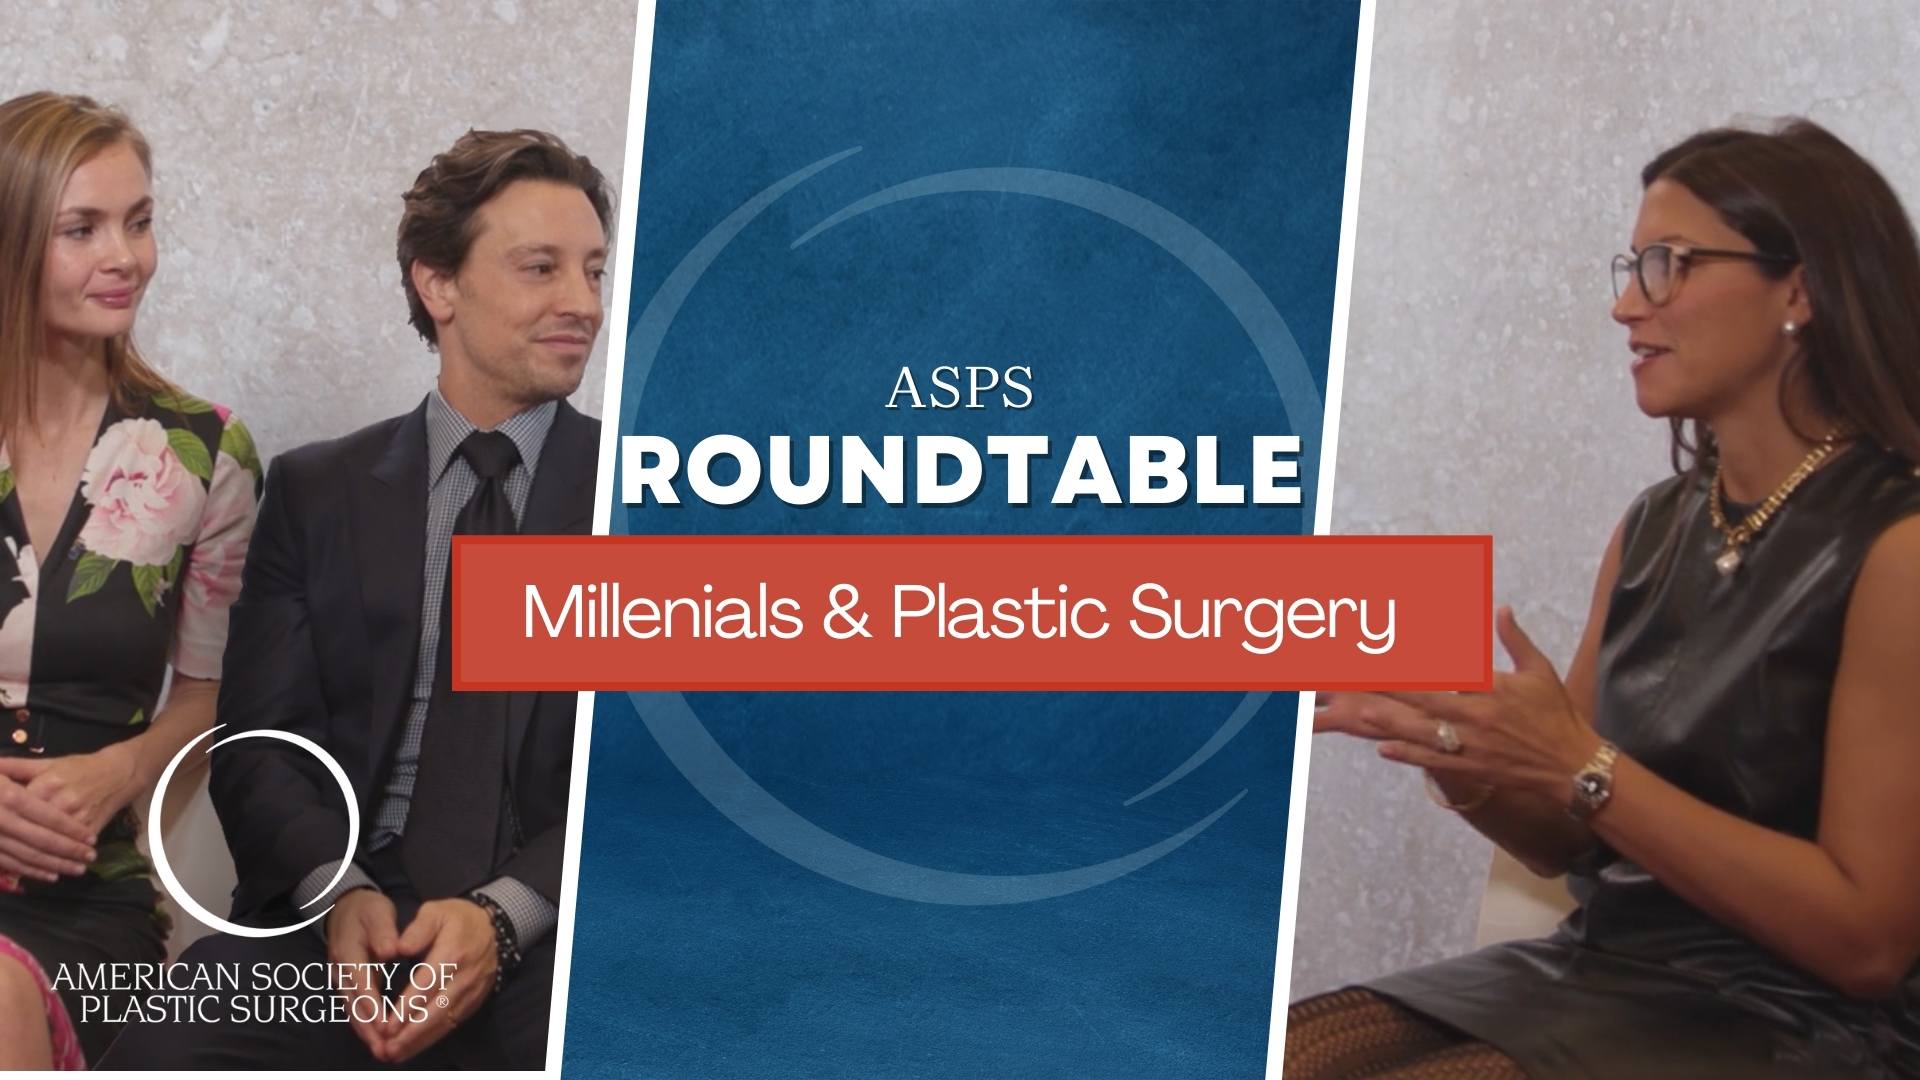 ASPS Roundtable: The Millennial Plastic Surgery Boom